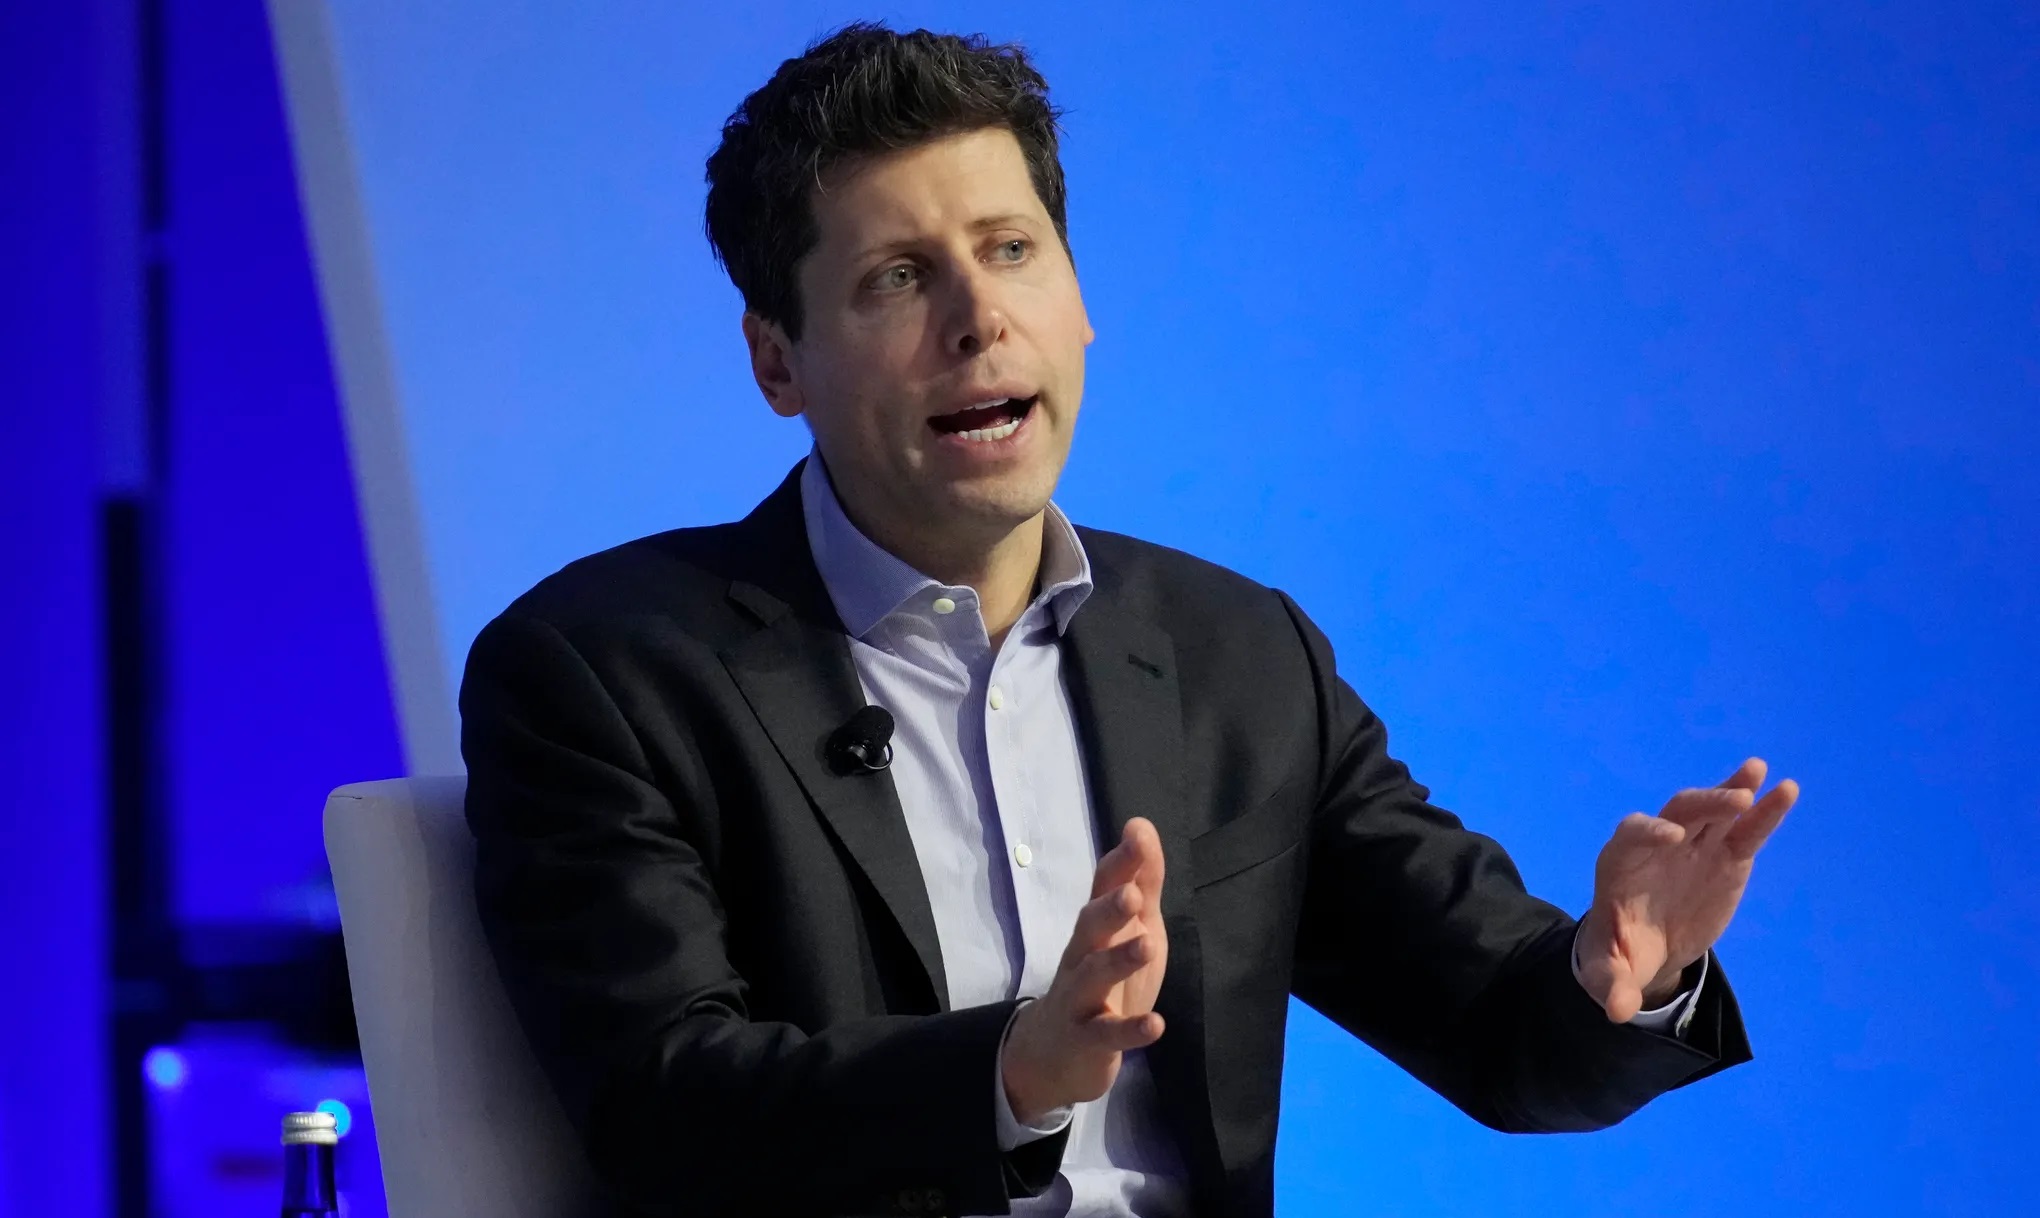 Sam Altman is returning to OpenAI as CEO following removal